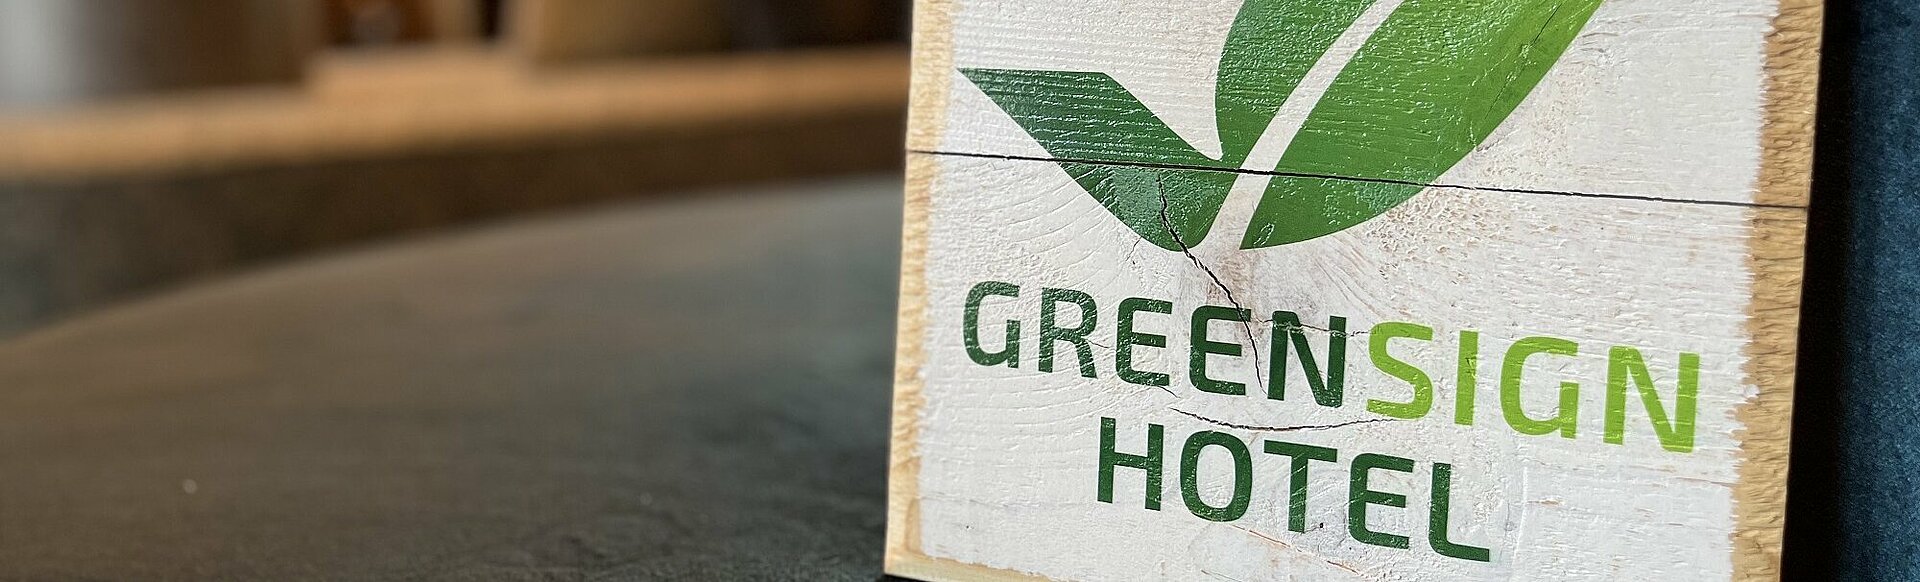 Green Sign Hotel